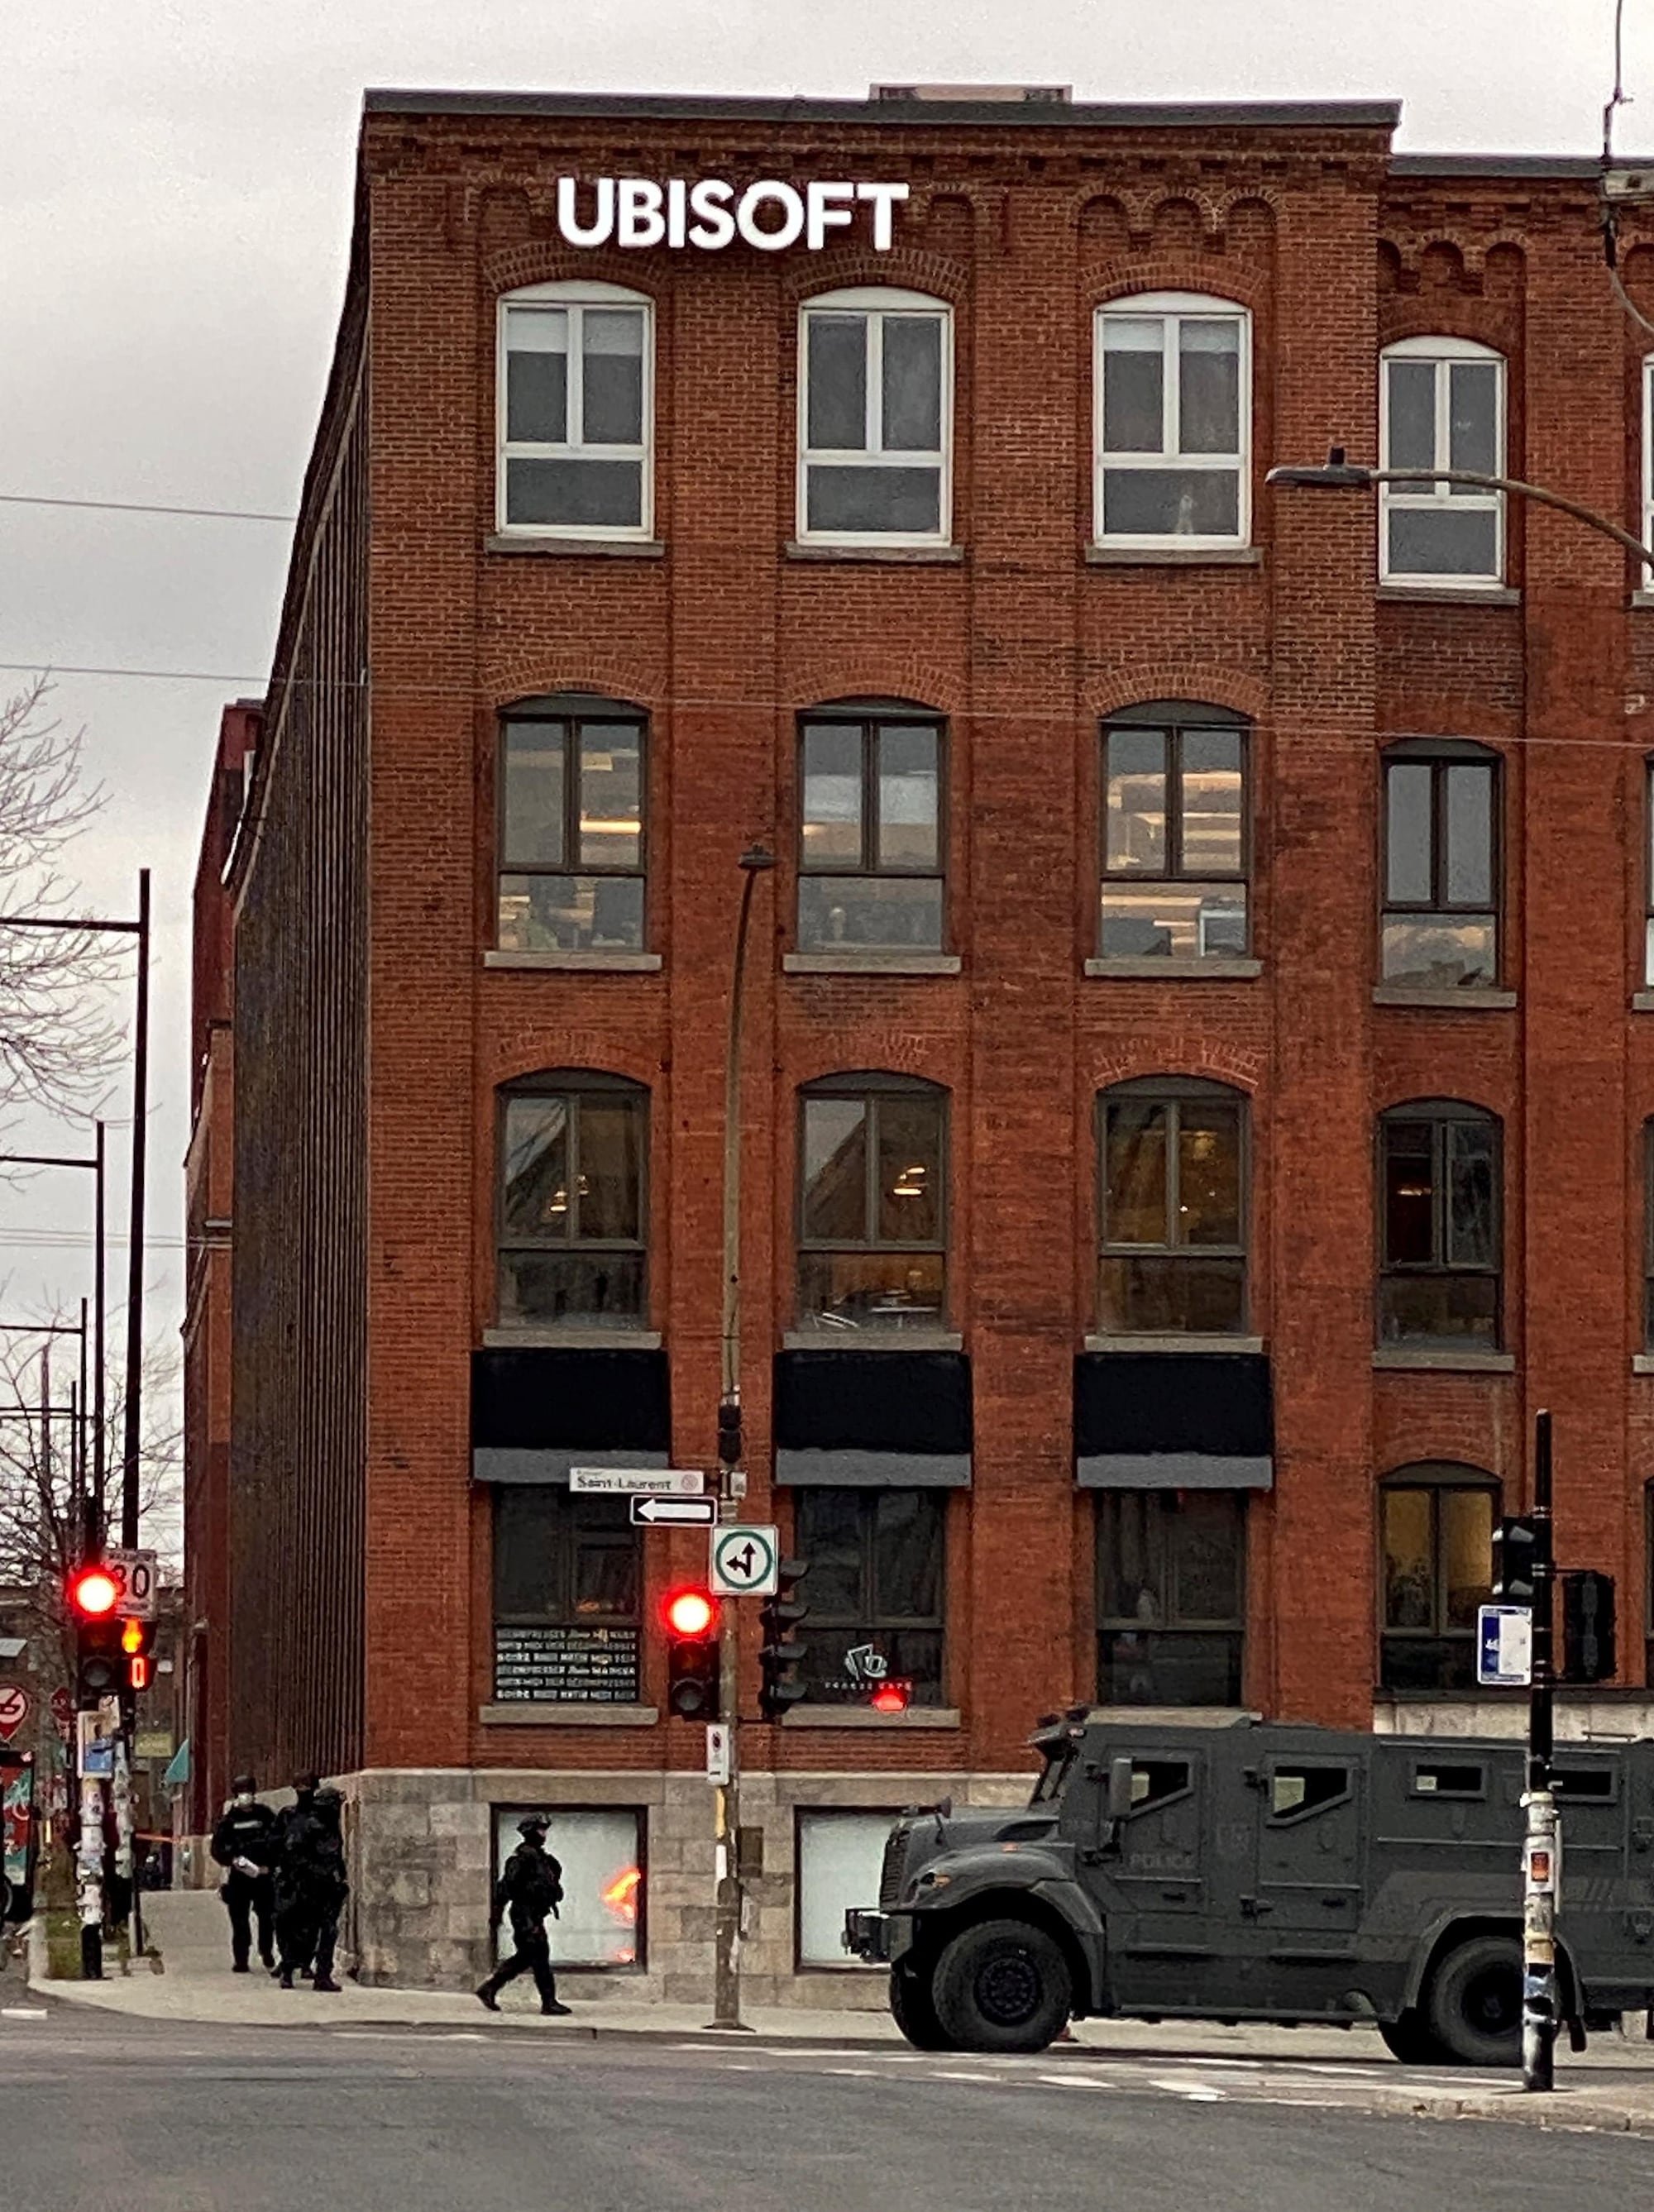 Police evacuating Ubisofts Montreal office building in ongoing operation